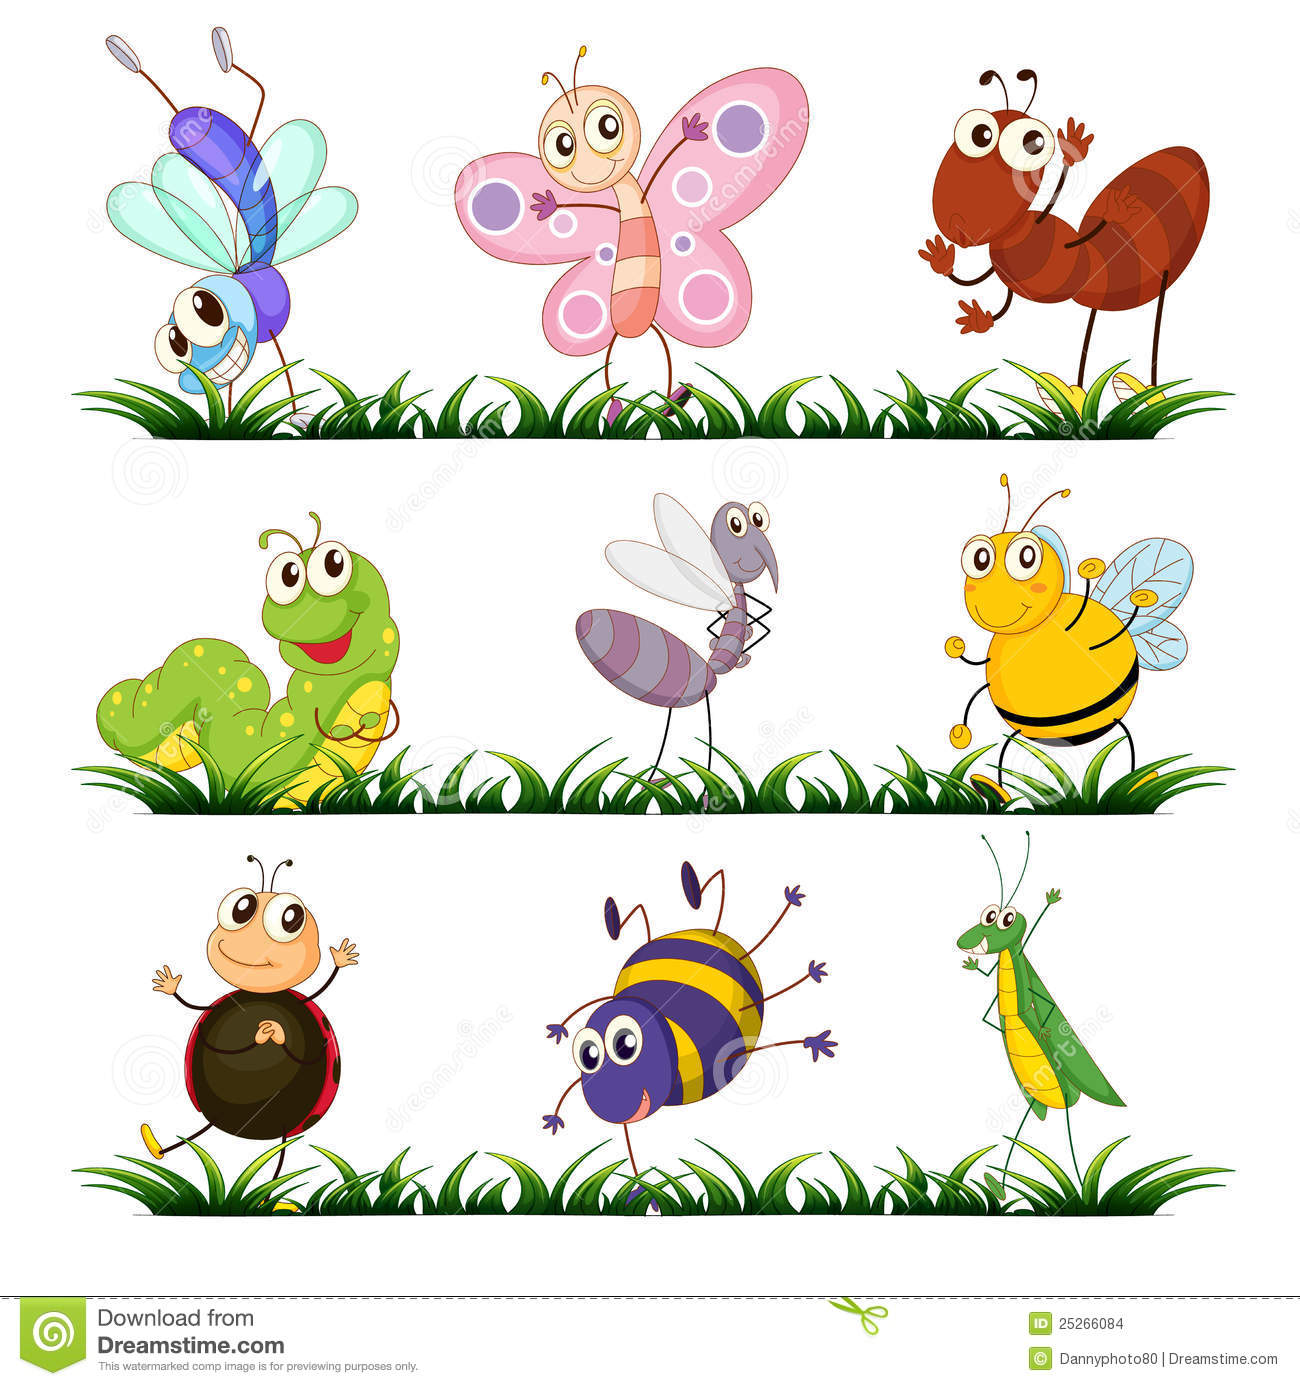 Free clipart of insects - Cli